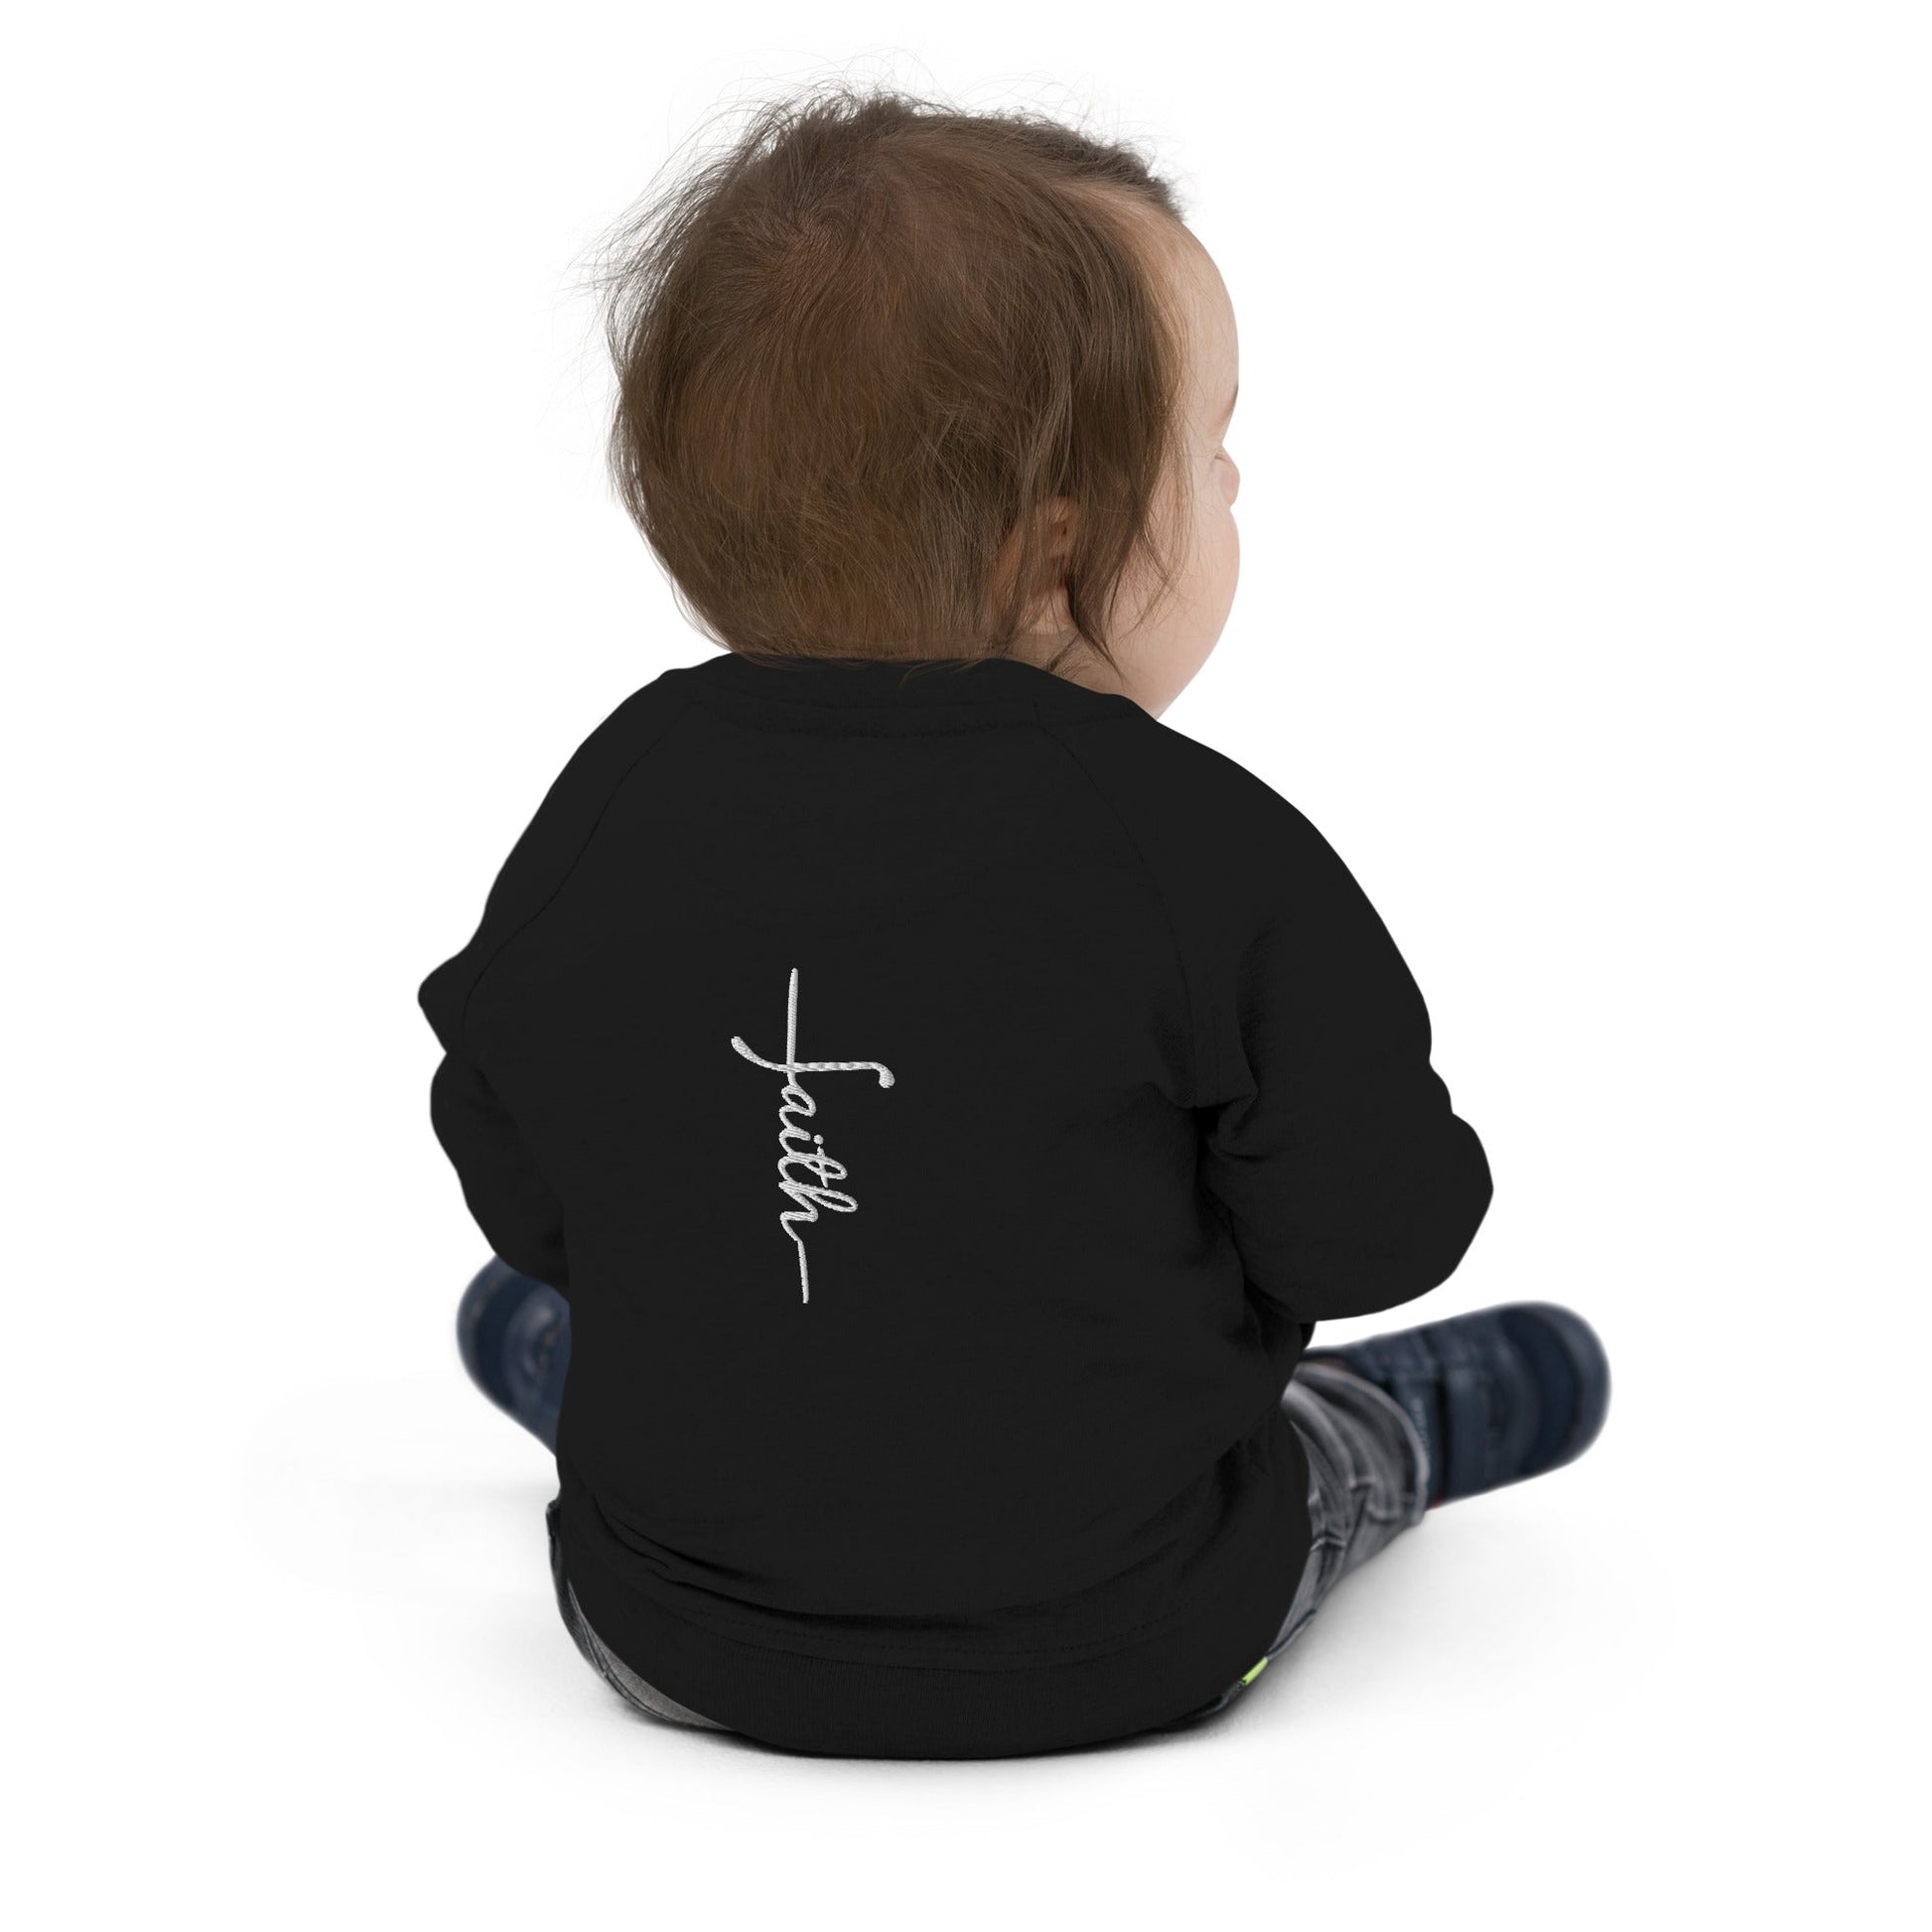 Organic Bomber Jacket for Toddlers with Embroidered "Faith" Cross - faithbook